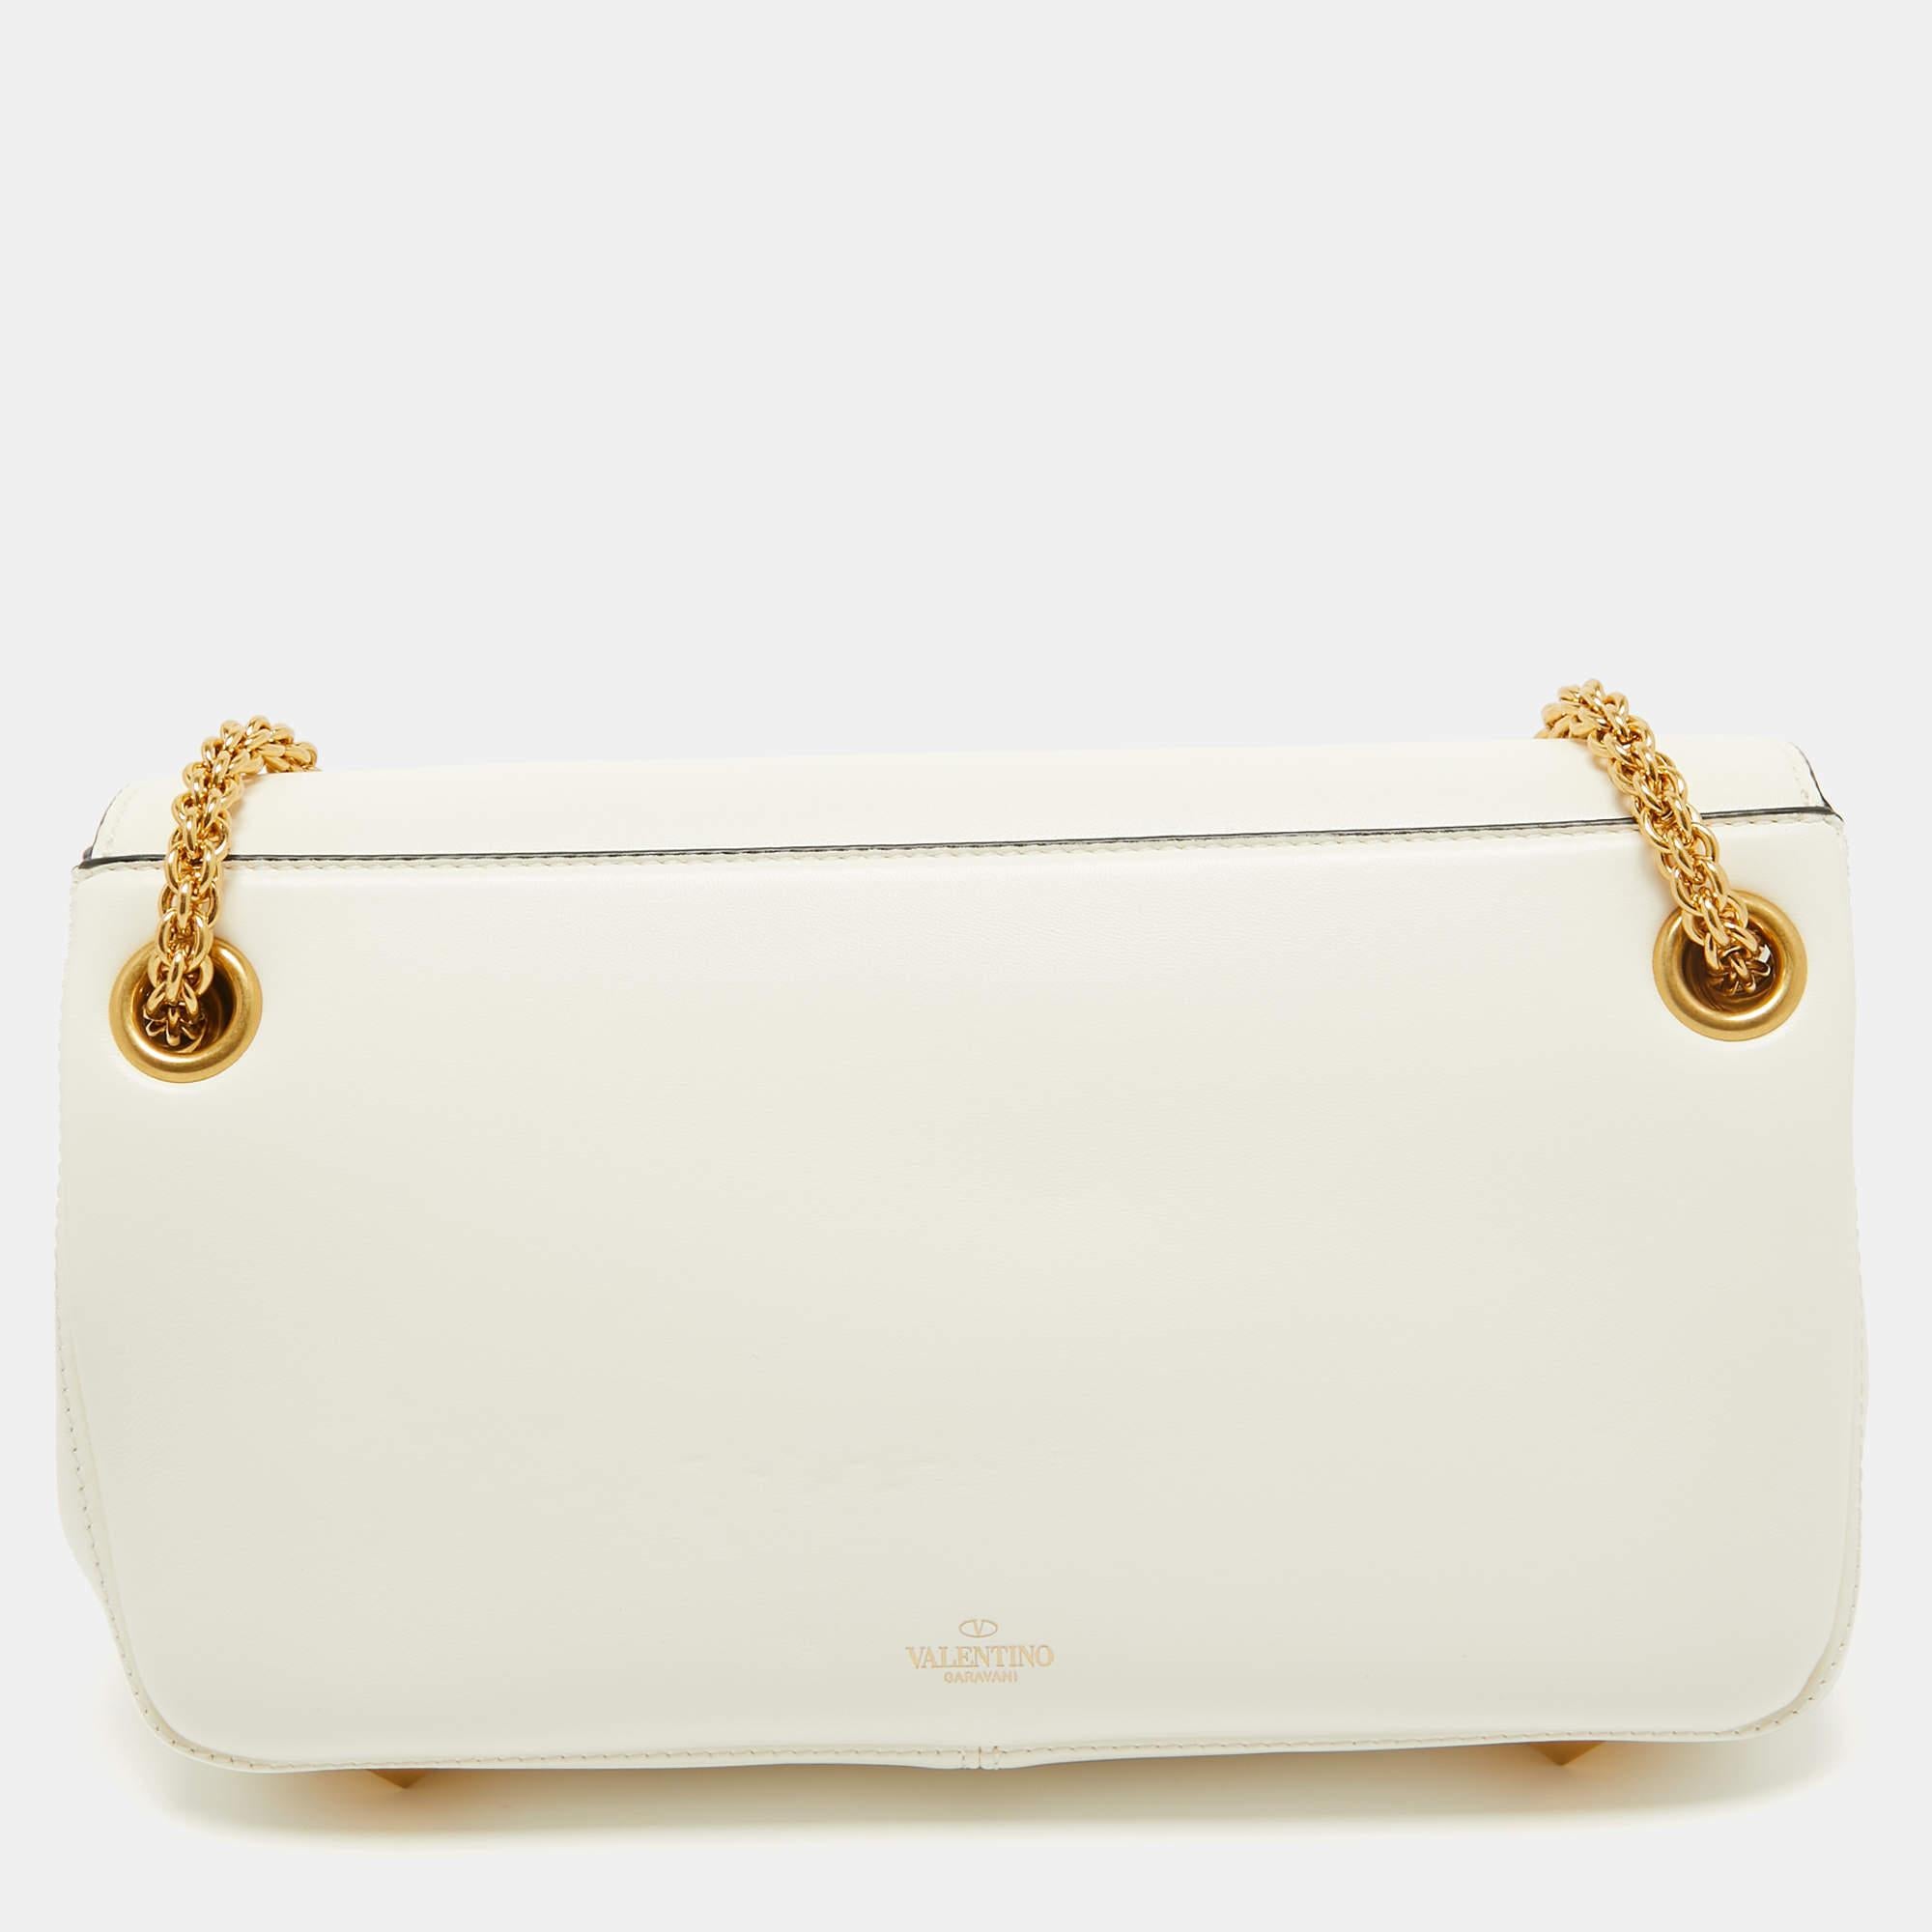 The Valentino bag epitomizes sophistication with its luxurious ivory leather adorned with signature studs. This exquisite accessory features a spacious interior, an adjustable shoulder strap, and the iconic Valentino logo, making it a timeless and